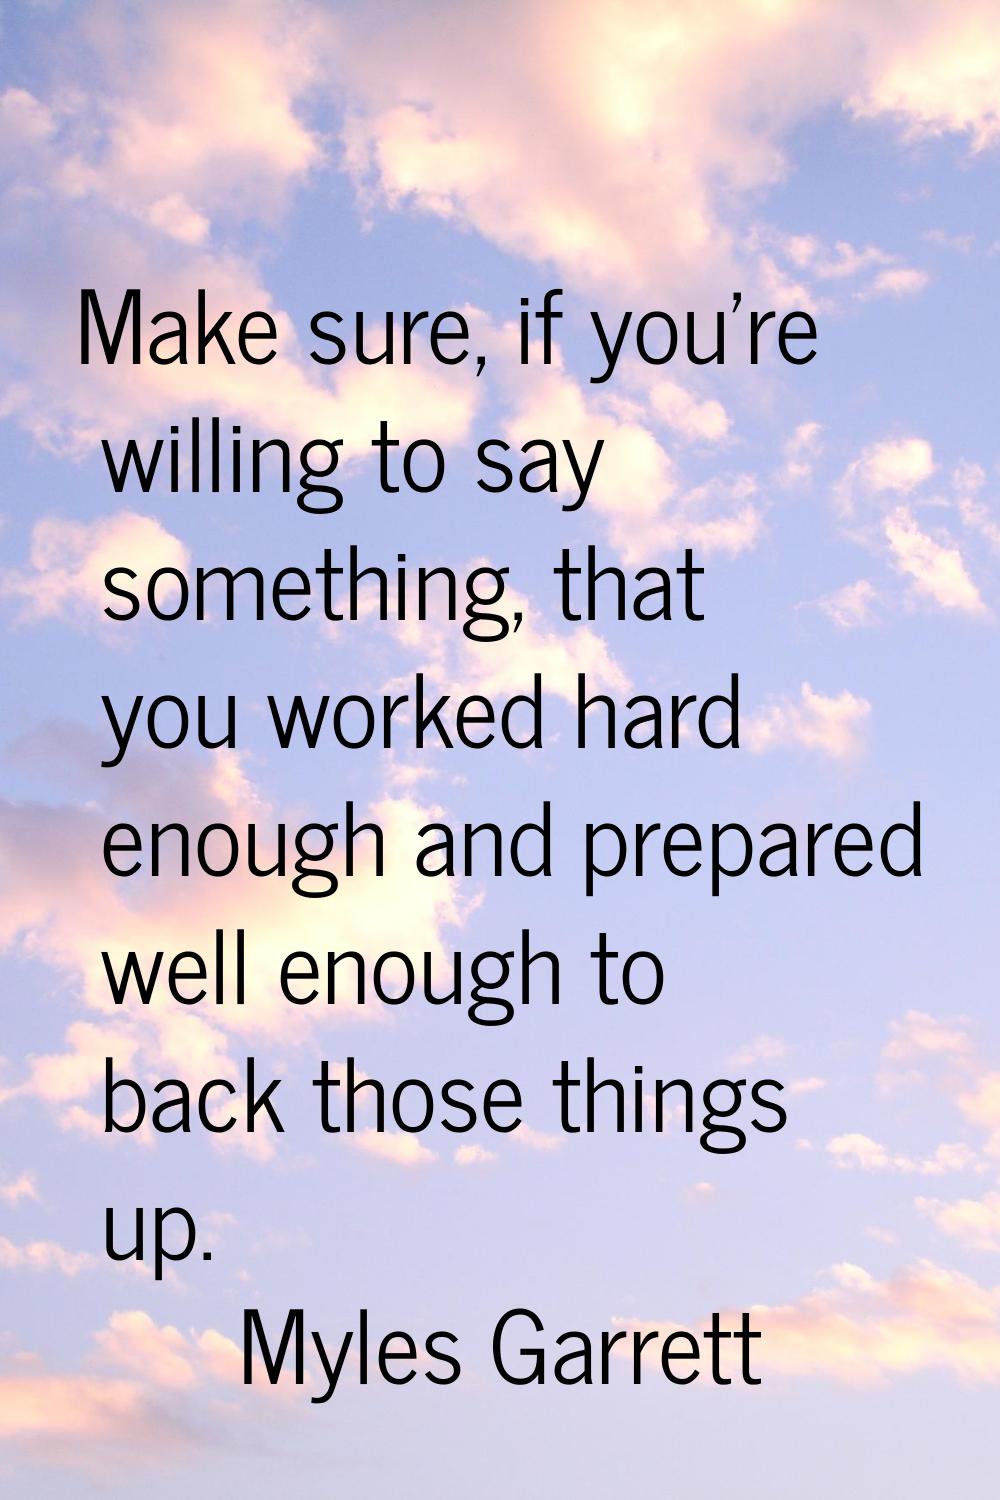 Make sure, if you're willing to say something, that you worked hard enough and prepared well enough